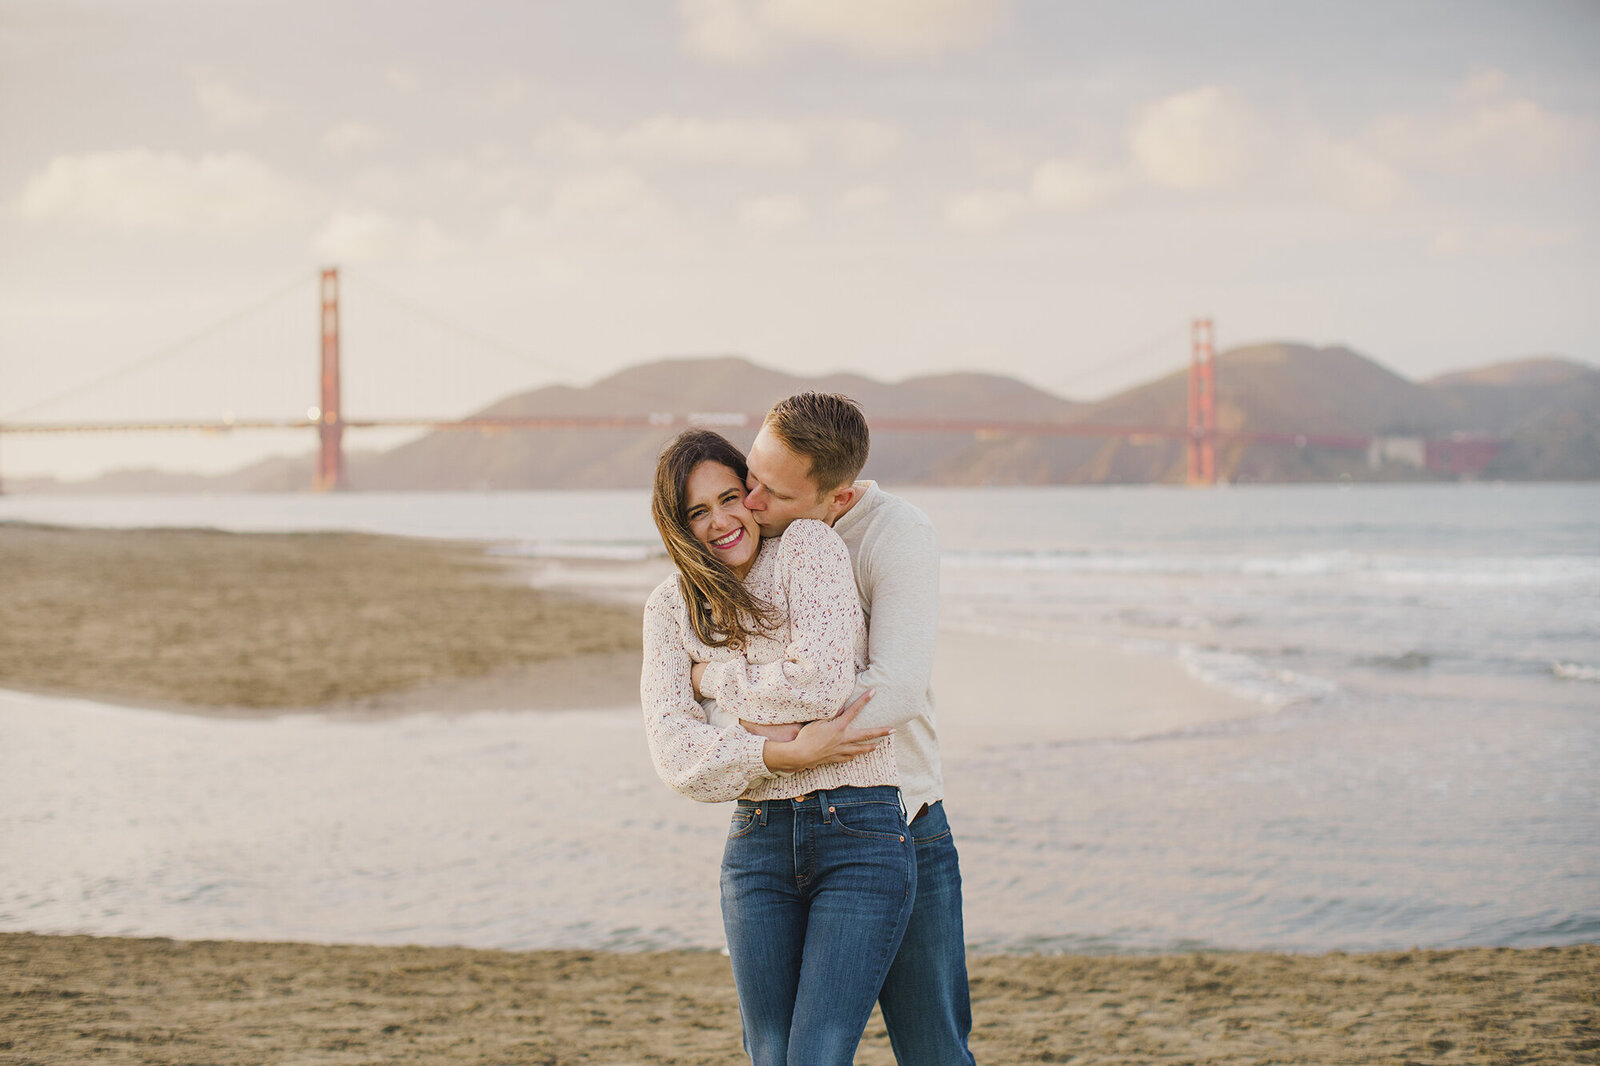 crissy fields beach engagement session